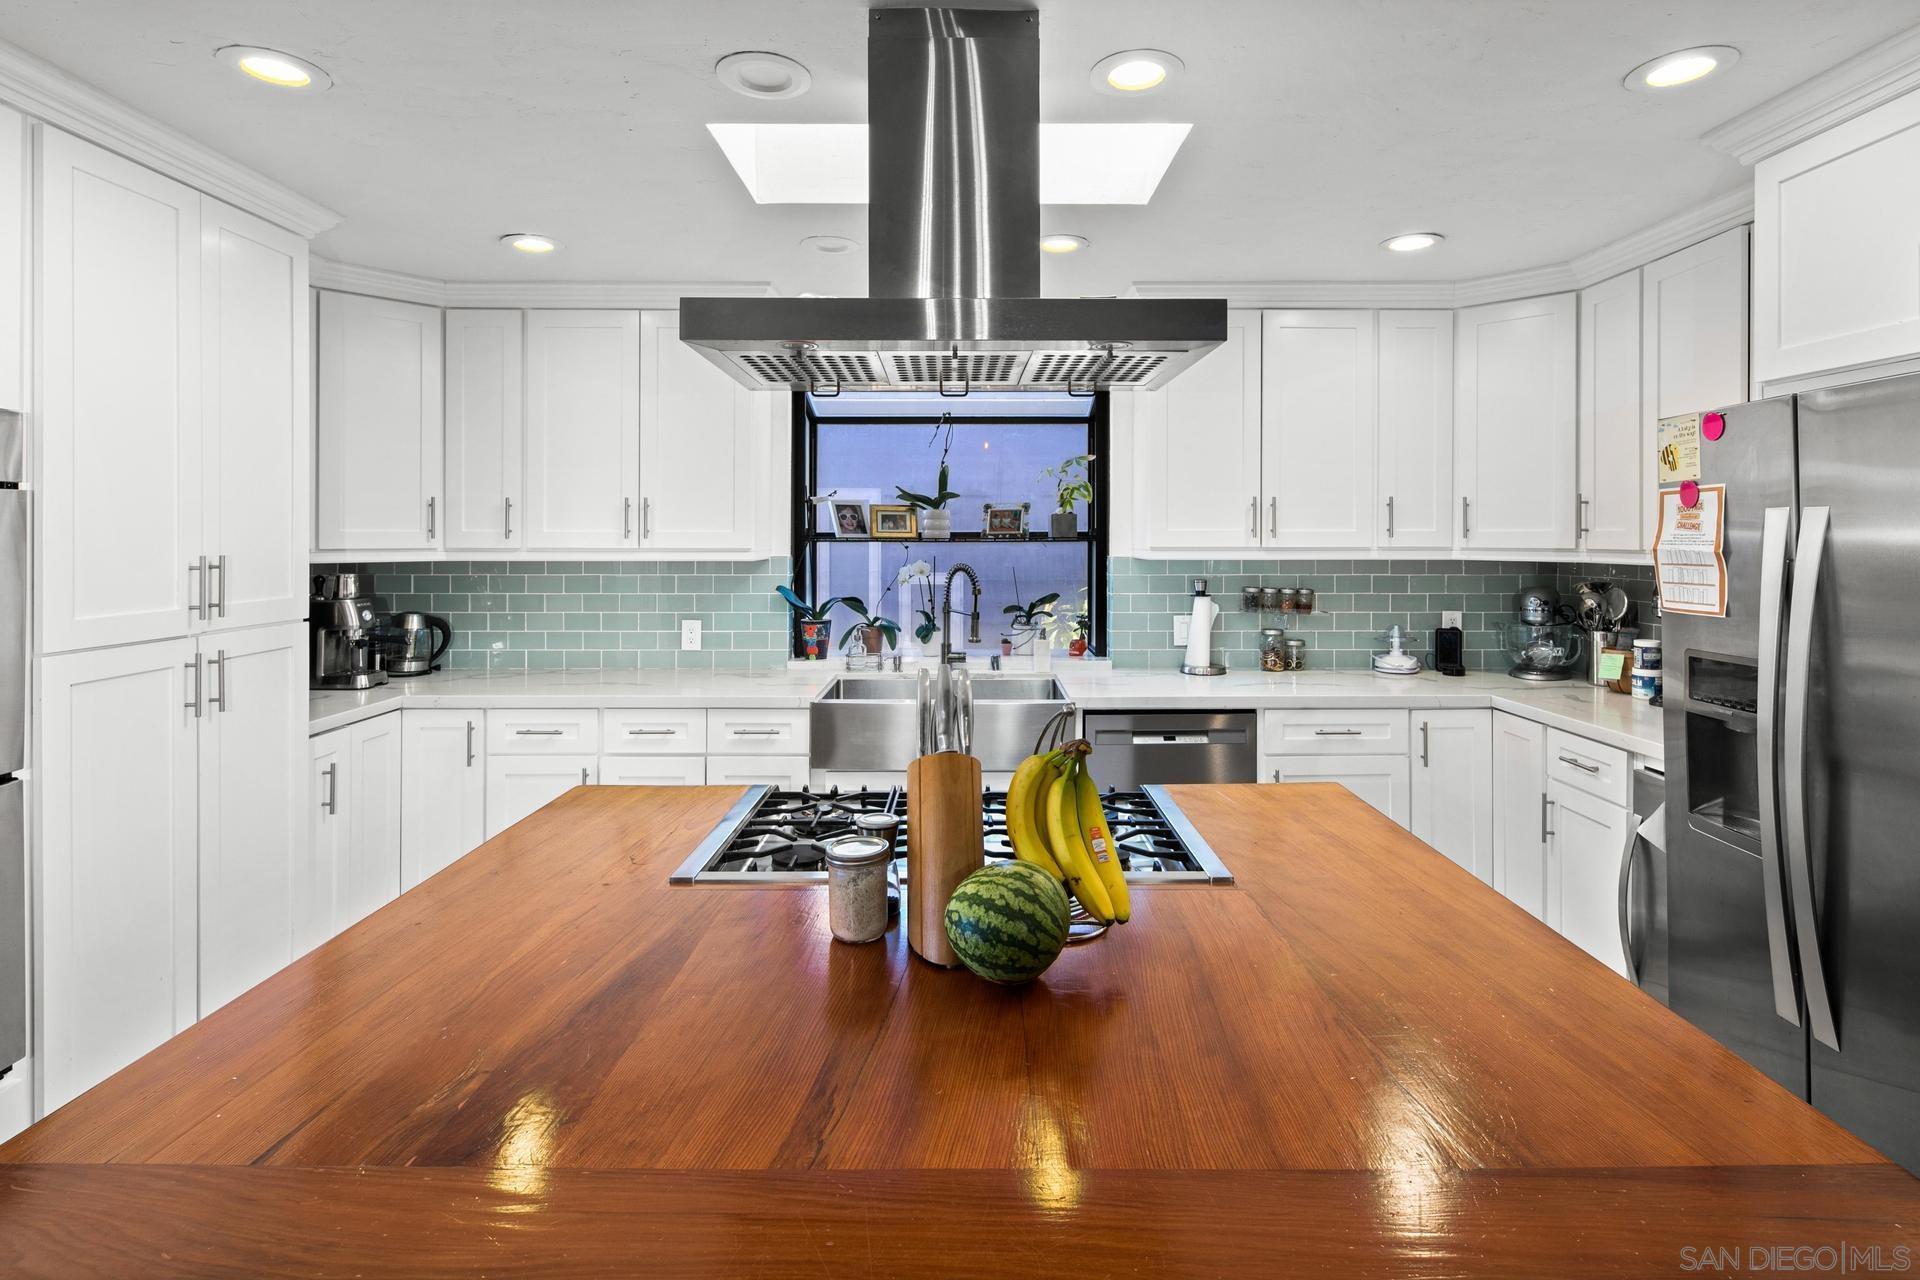 a kitchen with wooden floors sink and cabinets